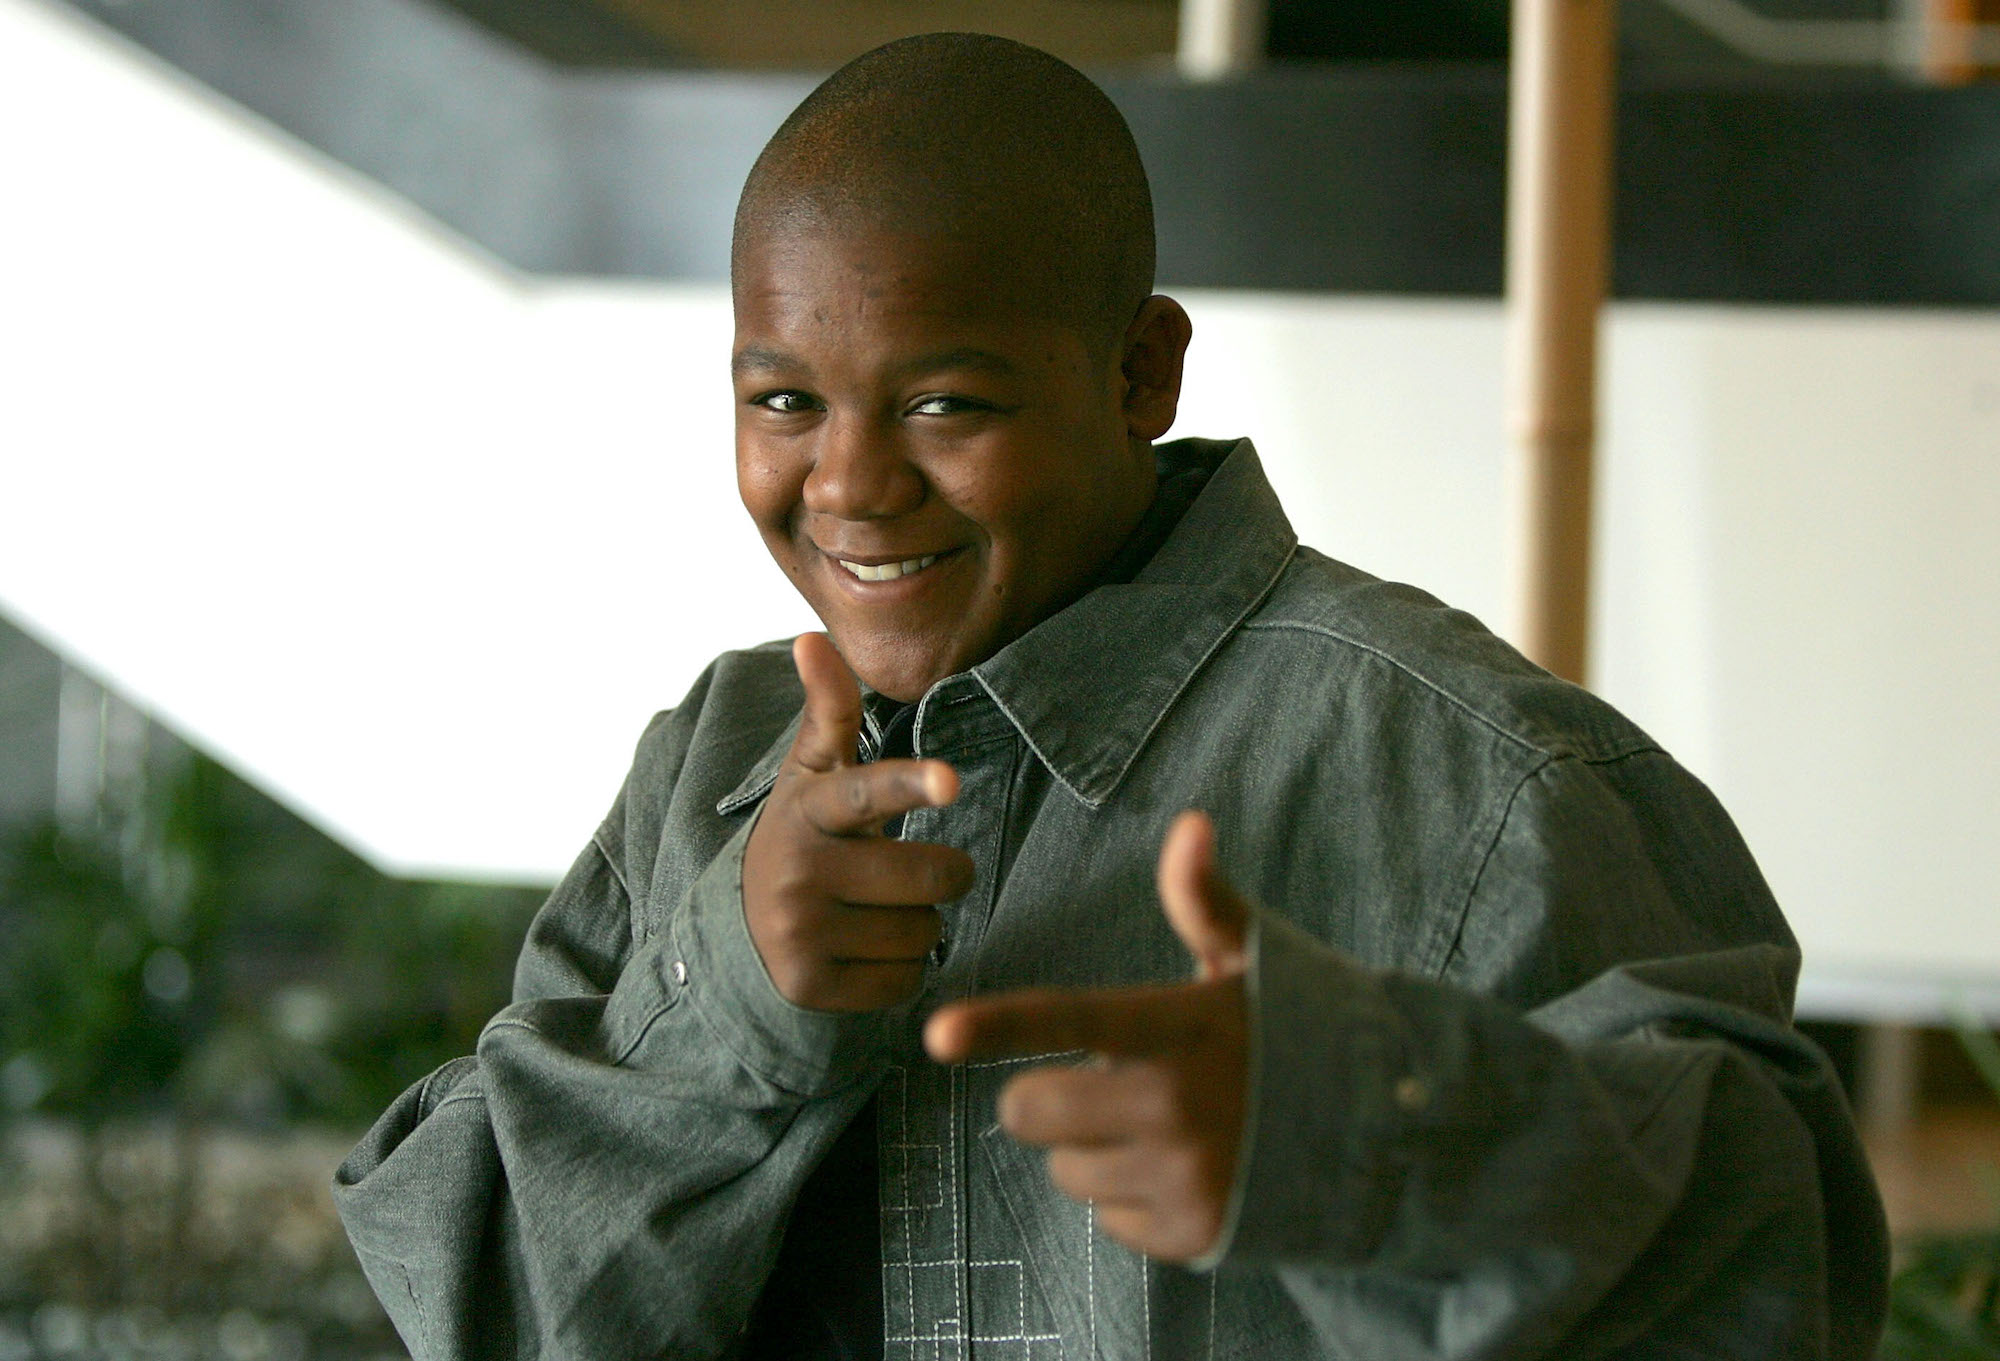 Kyle Massey smiling and pointing at the camera